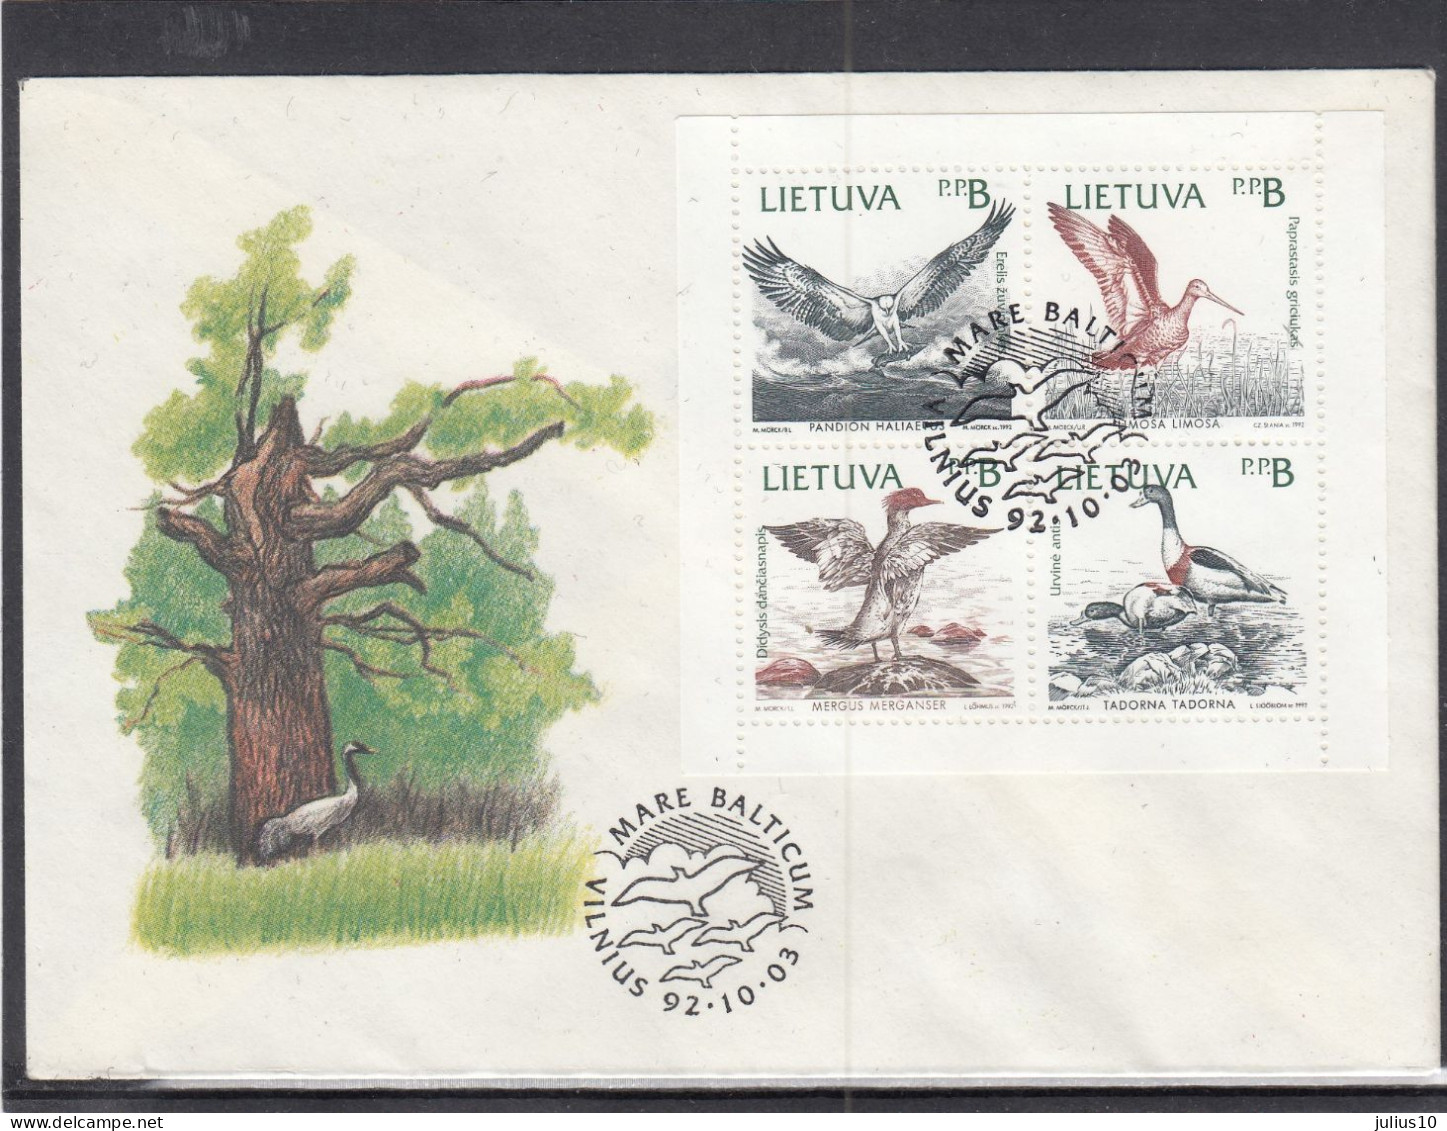 LITHUANIA 1992 Cover Birds Joint Issue #LTV273 - Lituanie